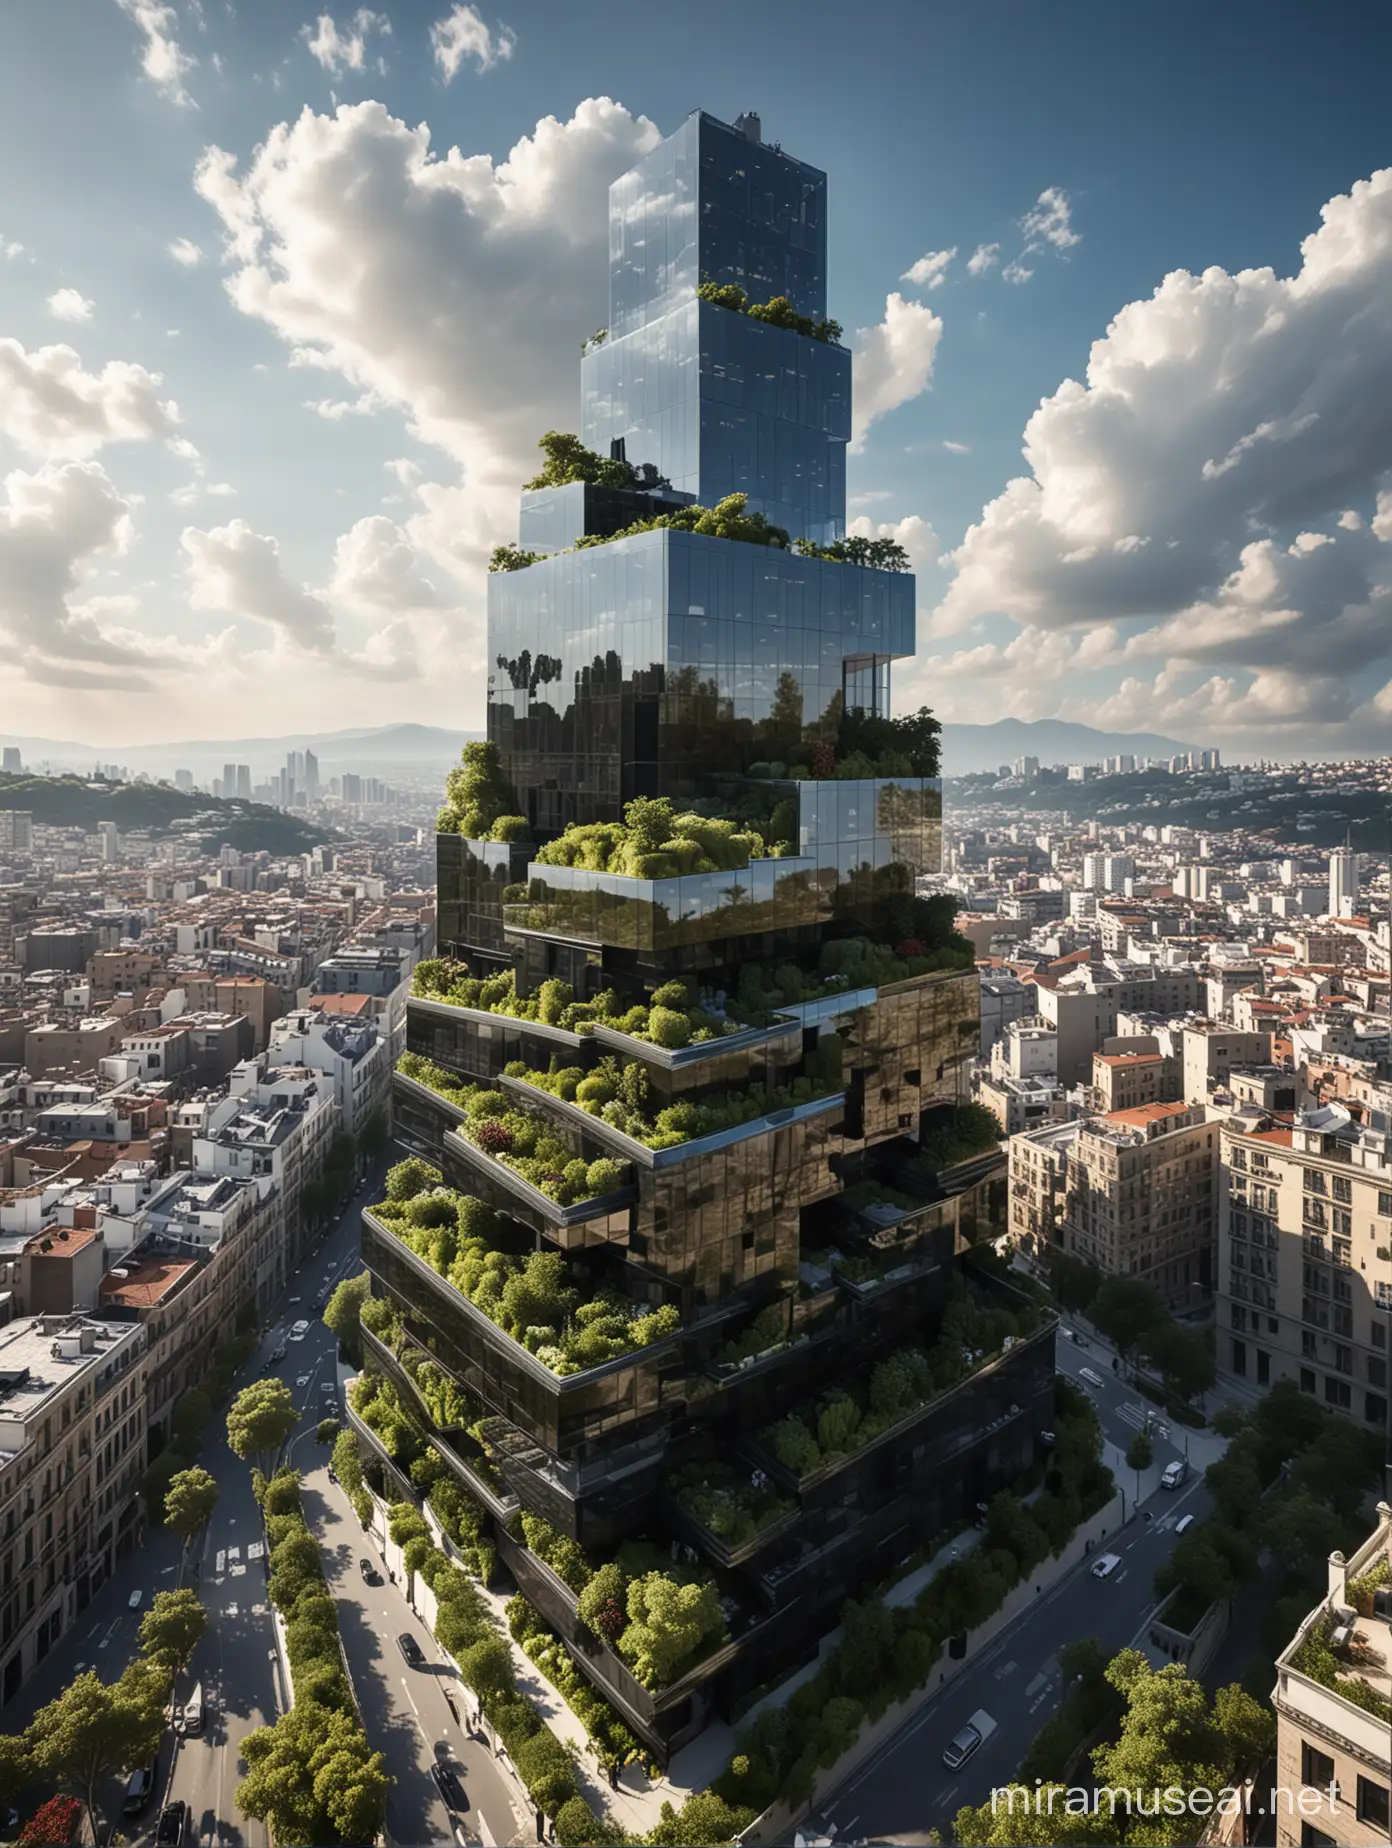 Eco-friendly, tower, terraced building with lush rooftop gardens and fluid lines, sublime and visionary, designed by Stefano Boeri 32k many cubic black glass architecture , drone view, with clouds hyper- realistic photo